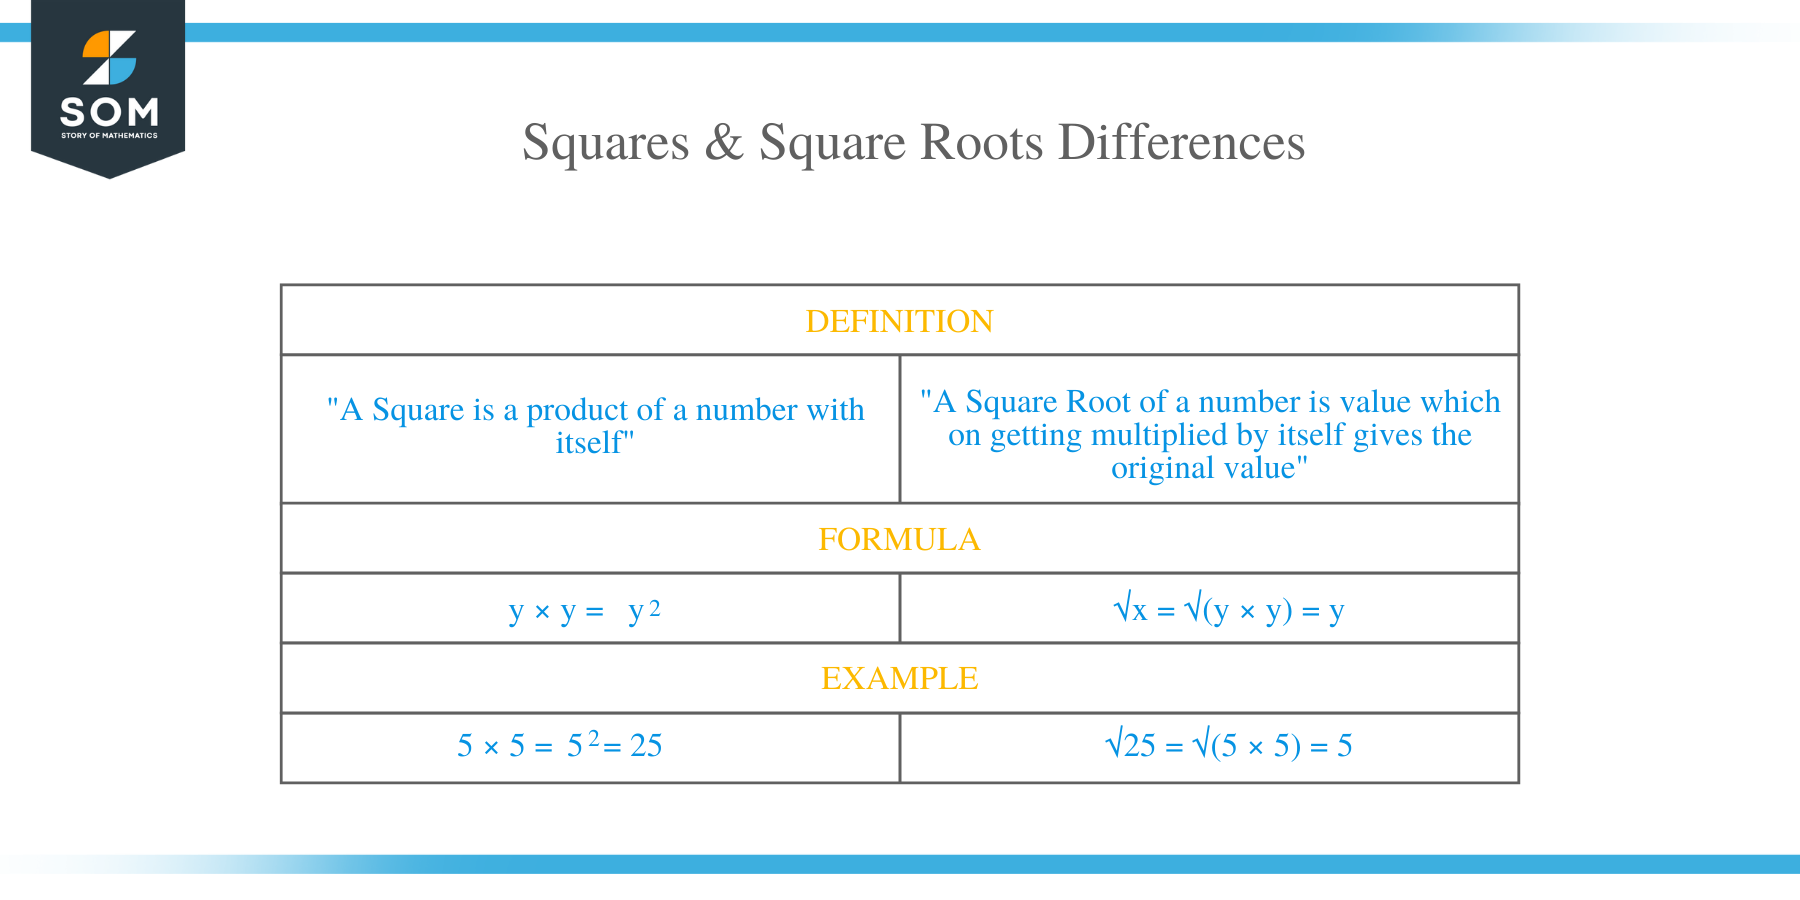 What is Square Root of a Number?